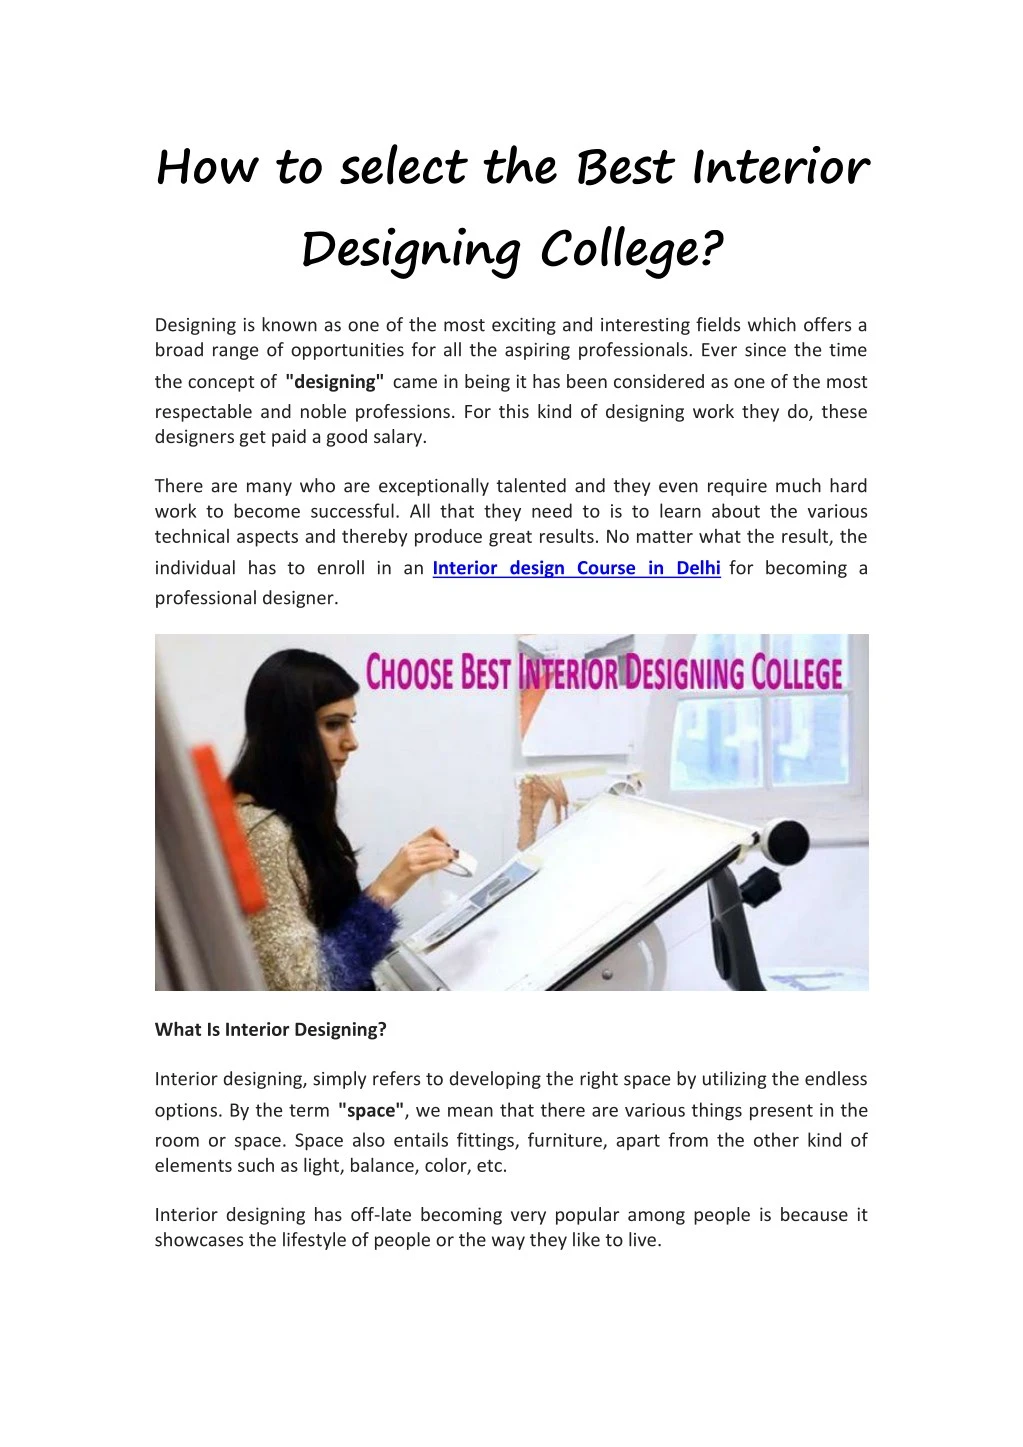 how to select the best interior designing college